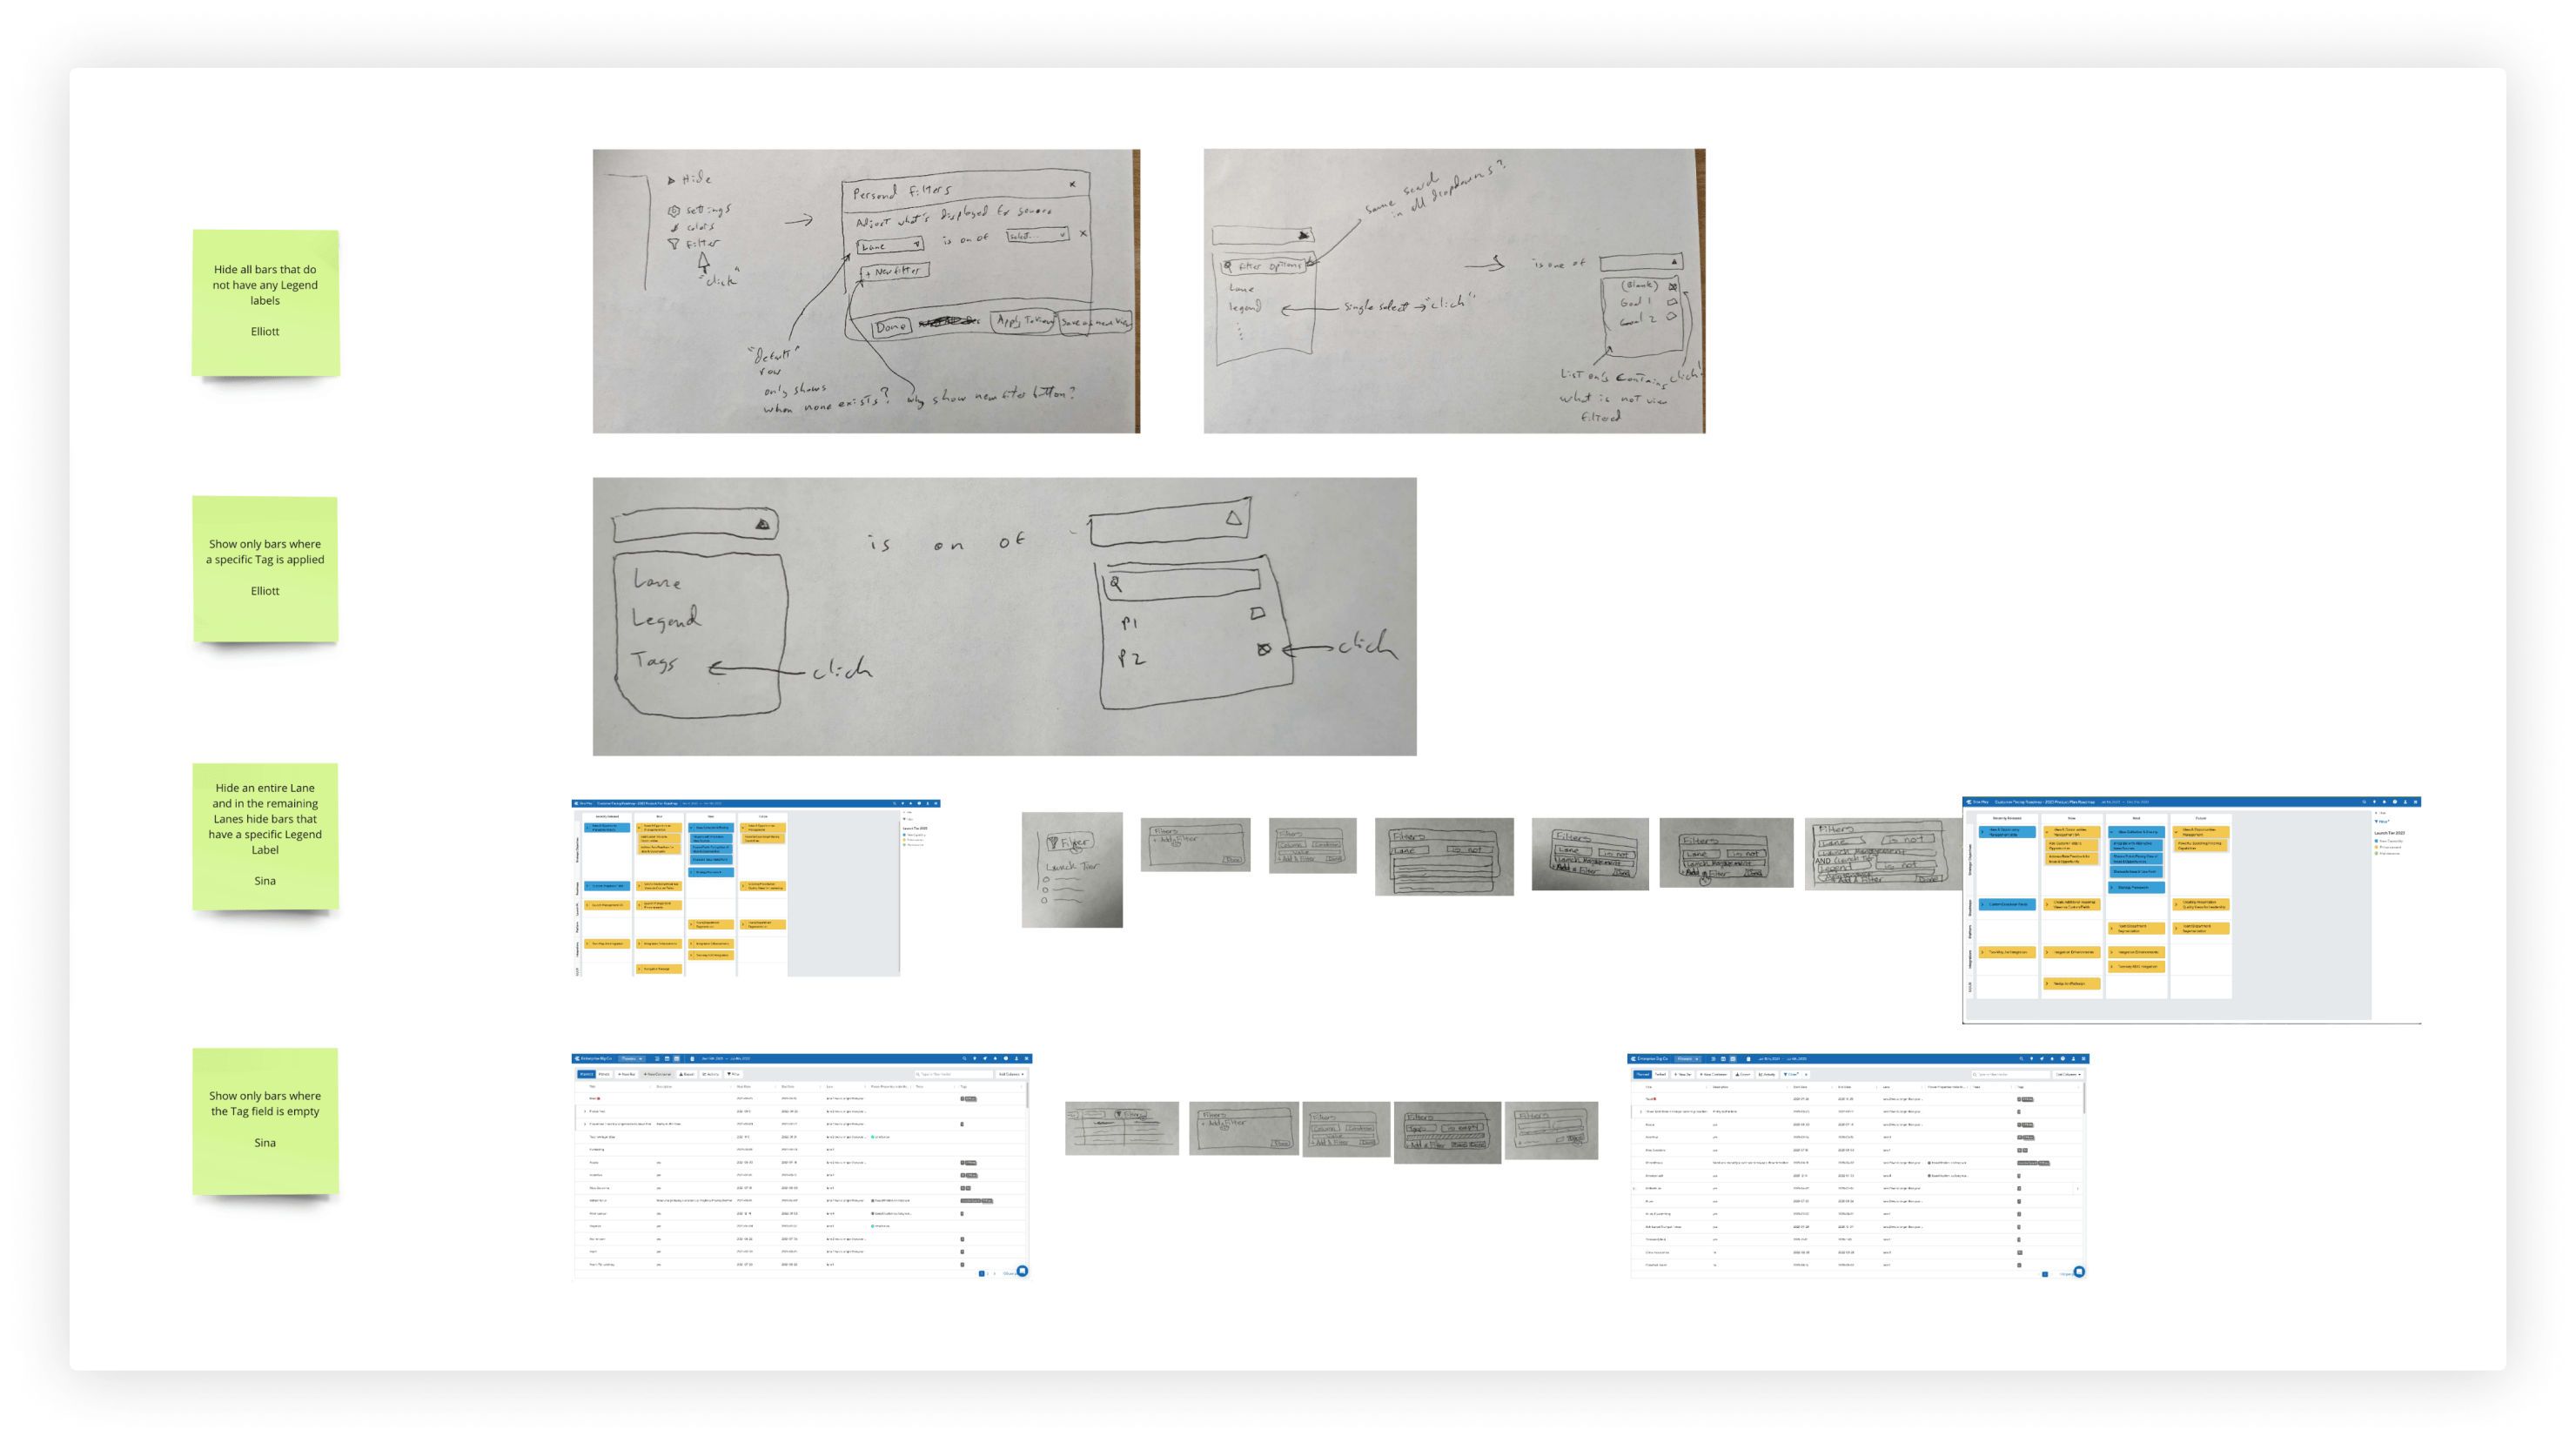 An image detailing some examples of drawing created during the Exploration phase of product design.